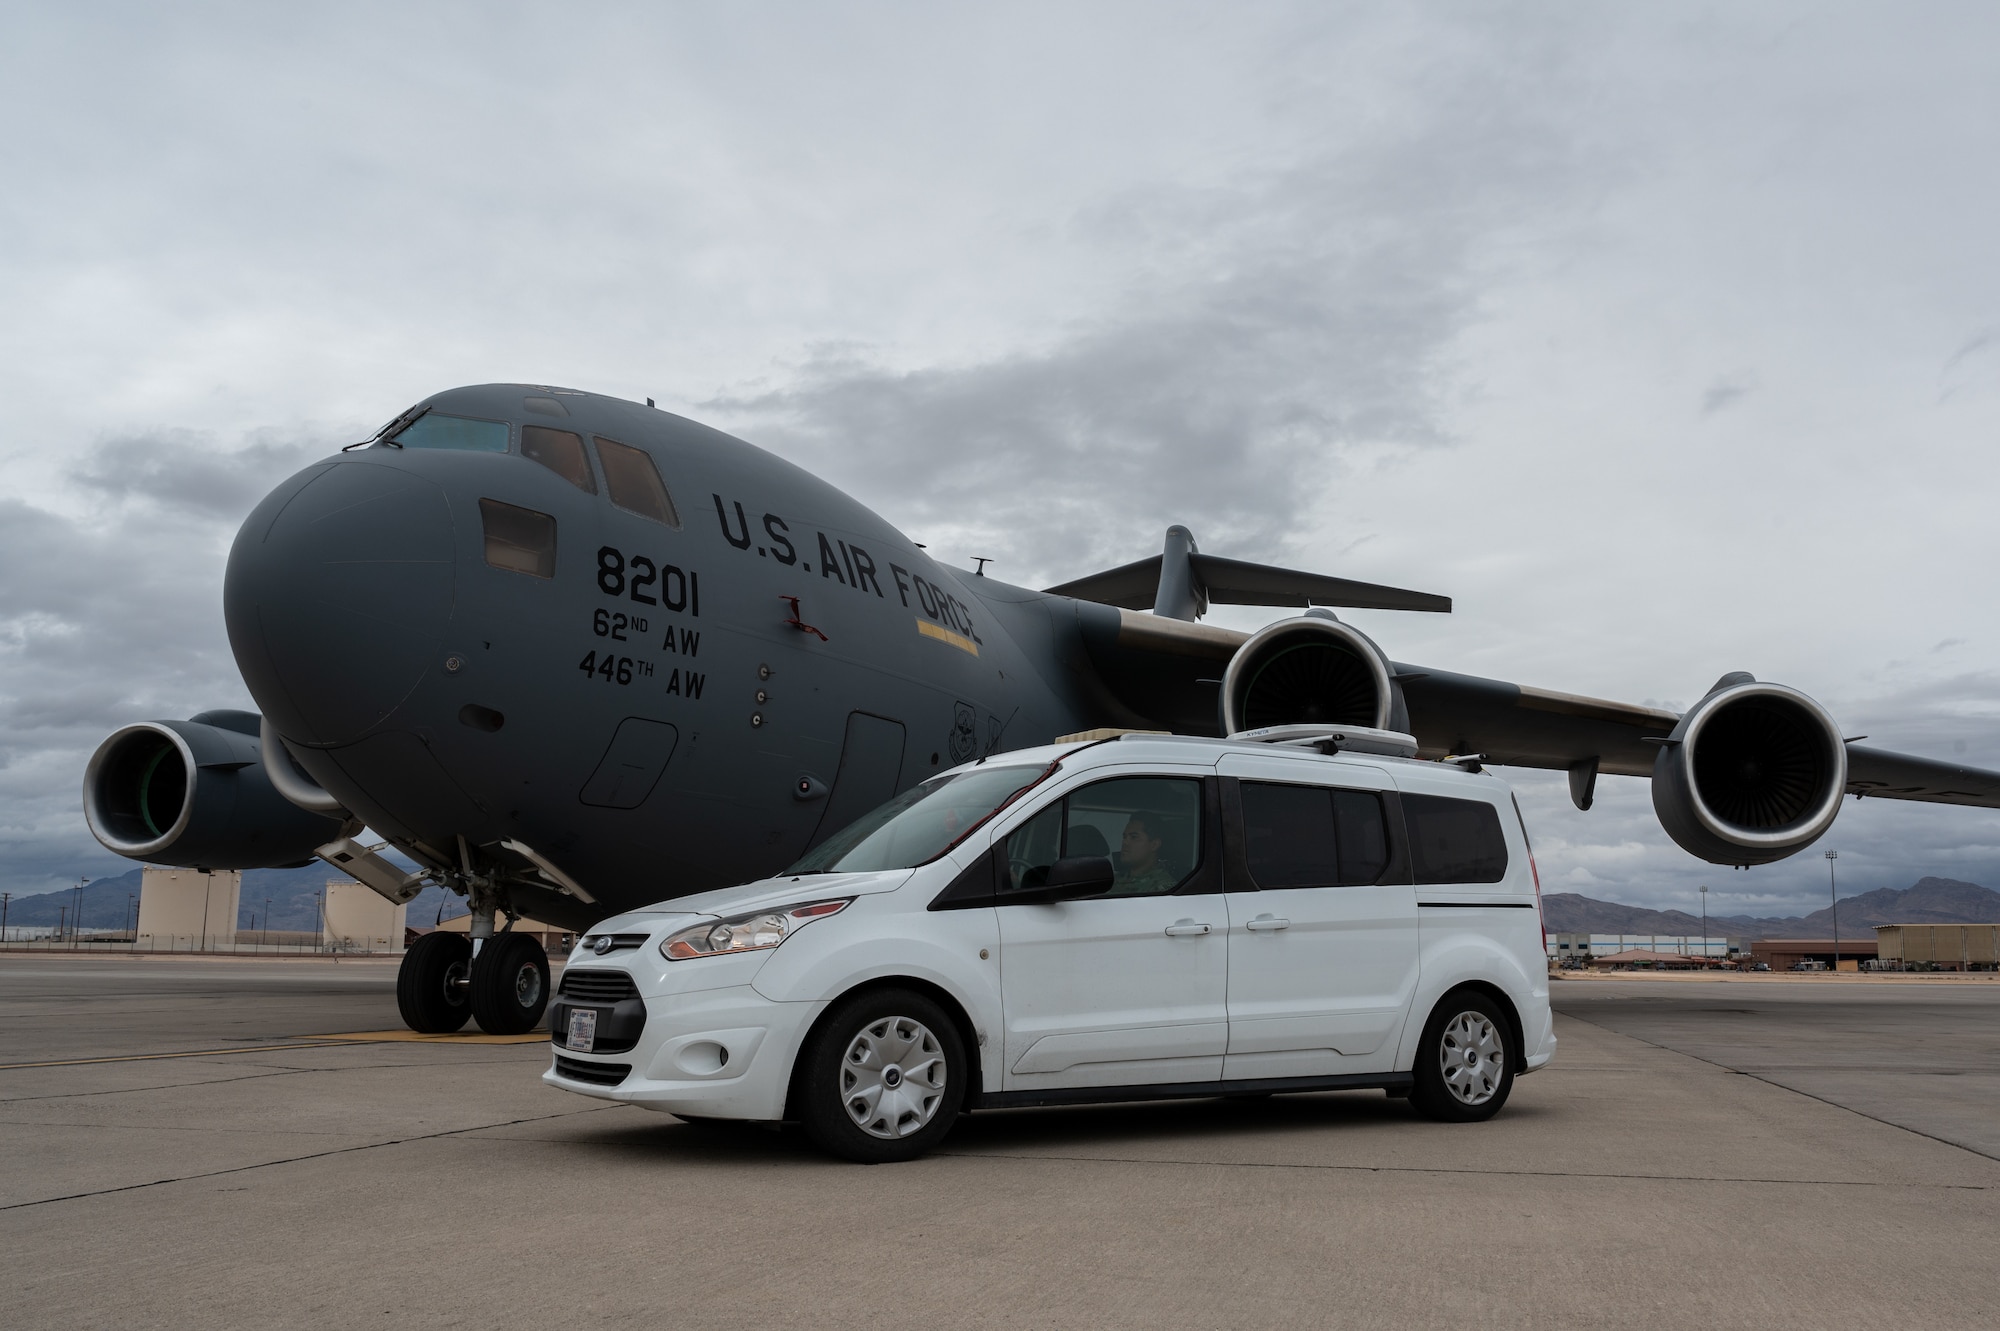 A C-17 is parked next to a van used in the Command and Control Element during Black Flag 23-1 at Nellis Air Force Base, Nevada, Feb. 23, 2023. This operation was accomplished by the combined effort between the C2 teams both on the ground and on the C-17 as they shared real time data to facilitate live operations. (U.S. Air Force photo by Airman 1st Class Josey Blades)